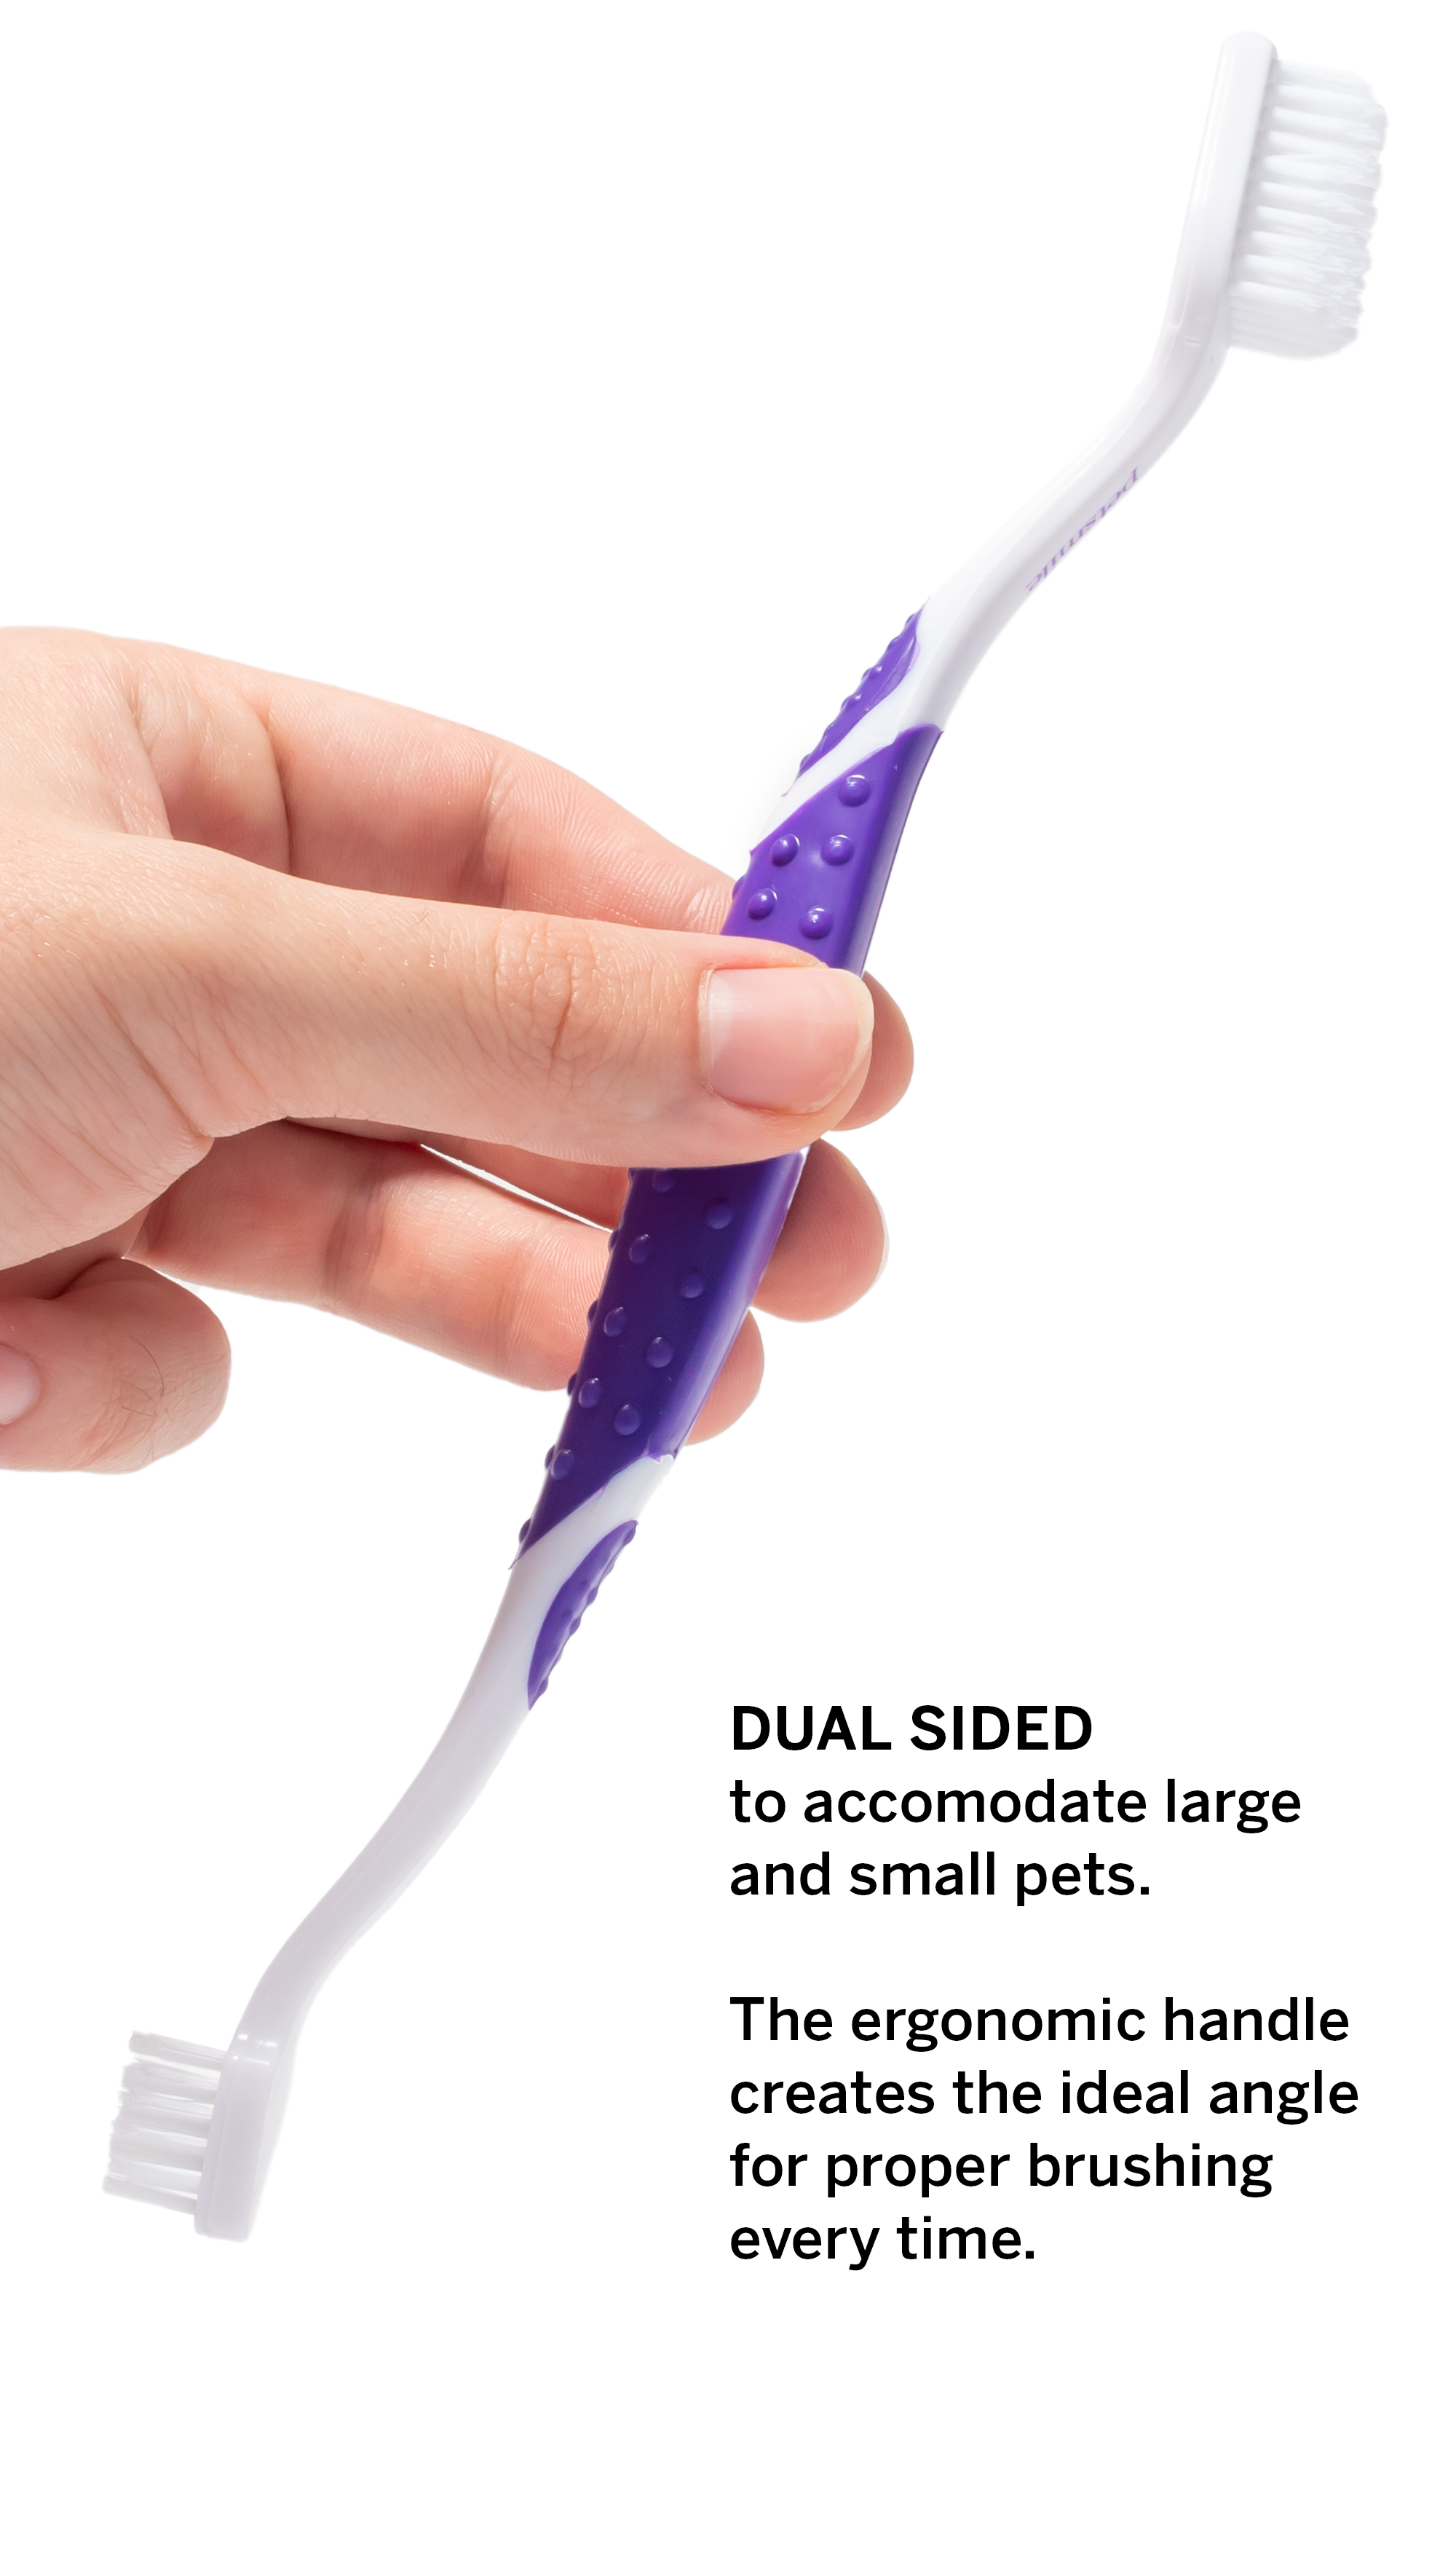 petsmile brush removes bacteria with ease , Dual-sided brush cleans teeth and gums , Purple toothbrush with 45-degree angle , Small toothpaste with London Broil flavor , Purple toothbrush that makes teeth cleaner